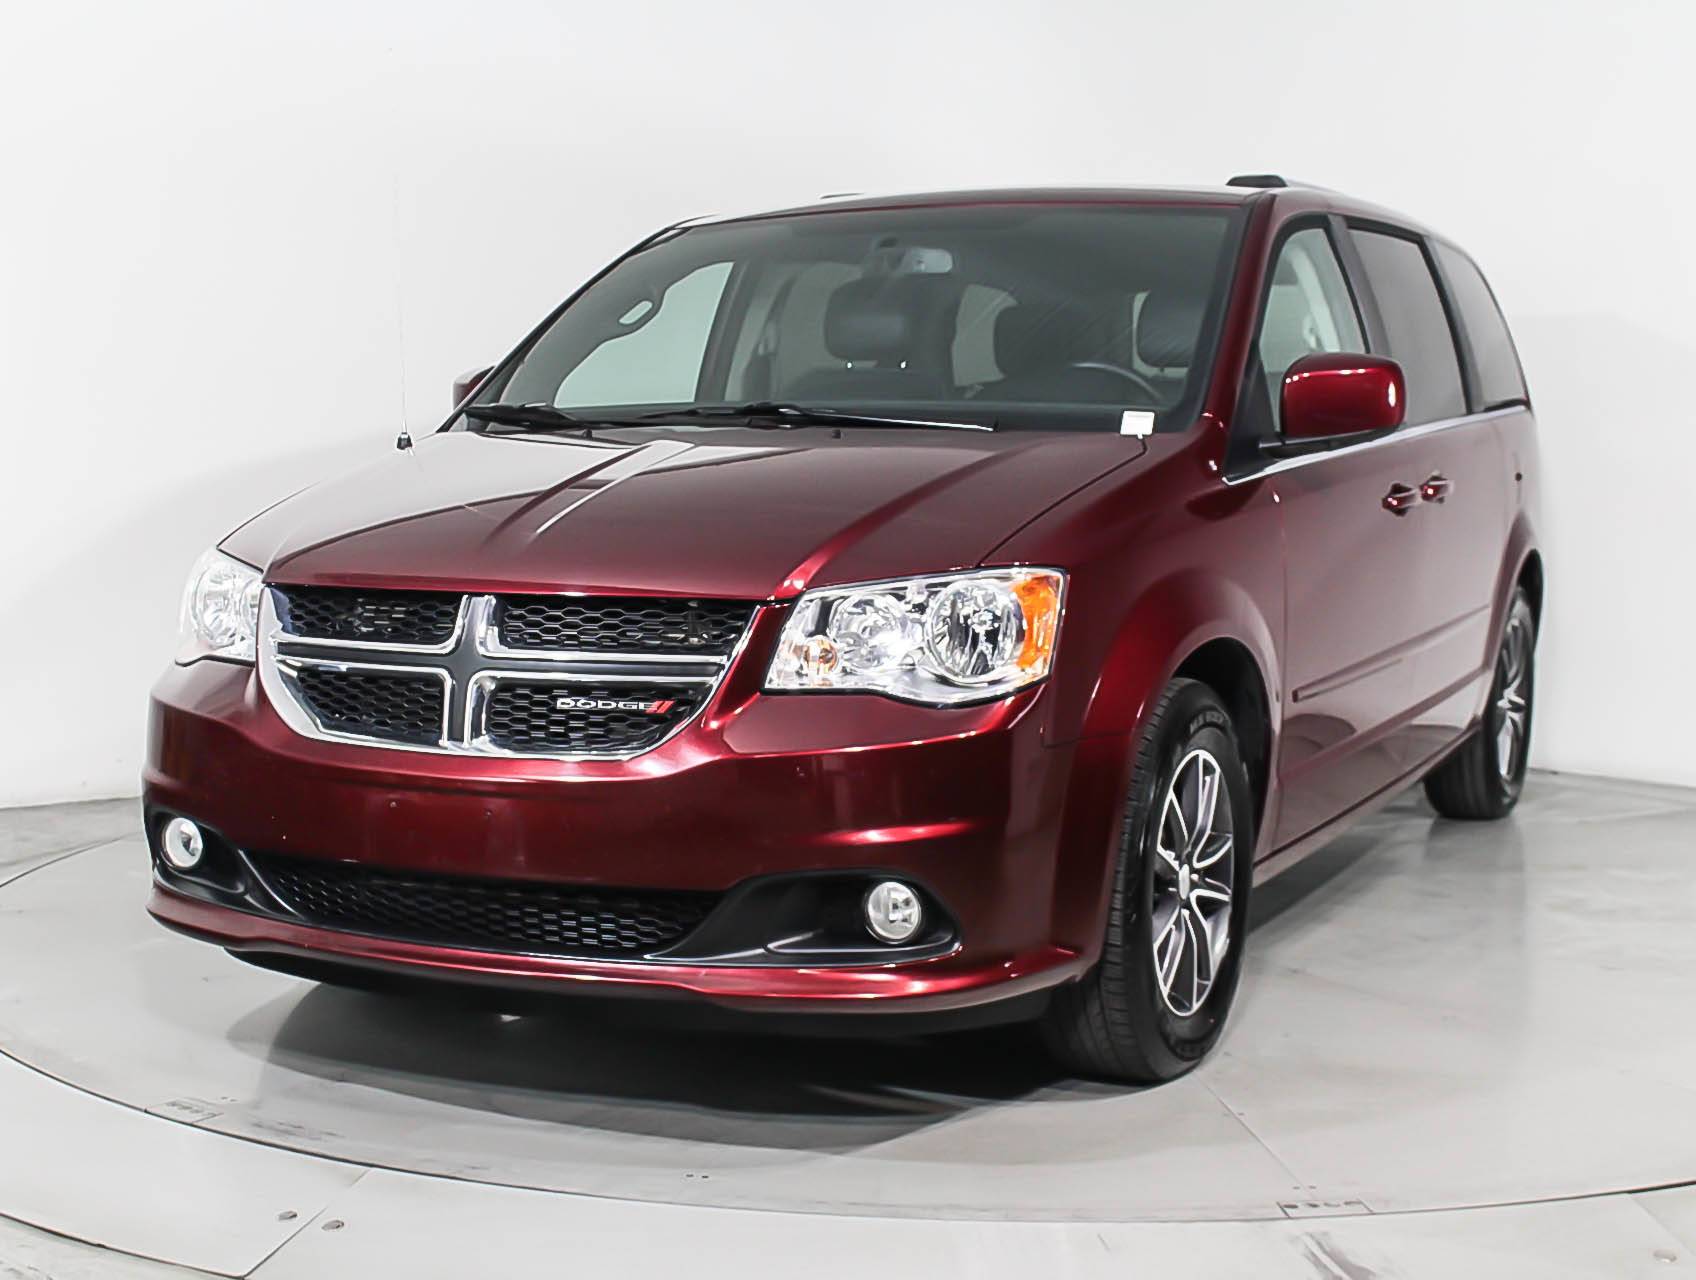 Used 2017 DODGE GRAND CARAVAN SXT for sale in HOLLYWOOD | 98252